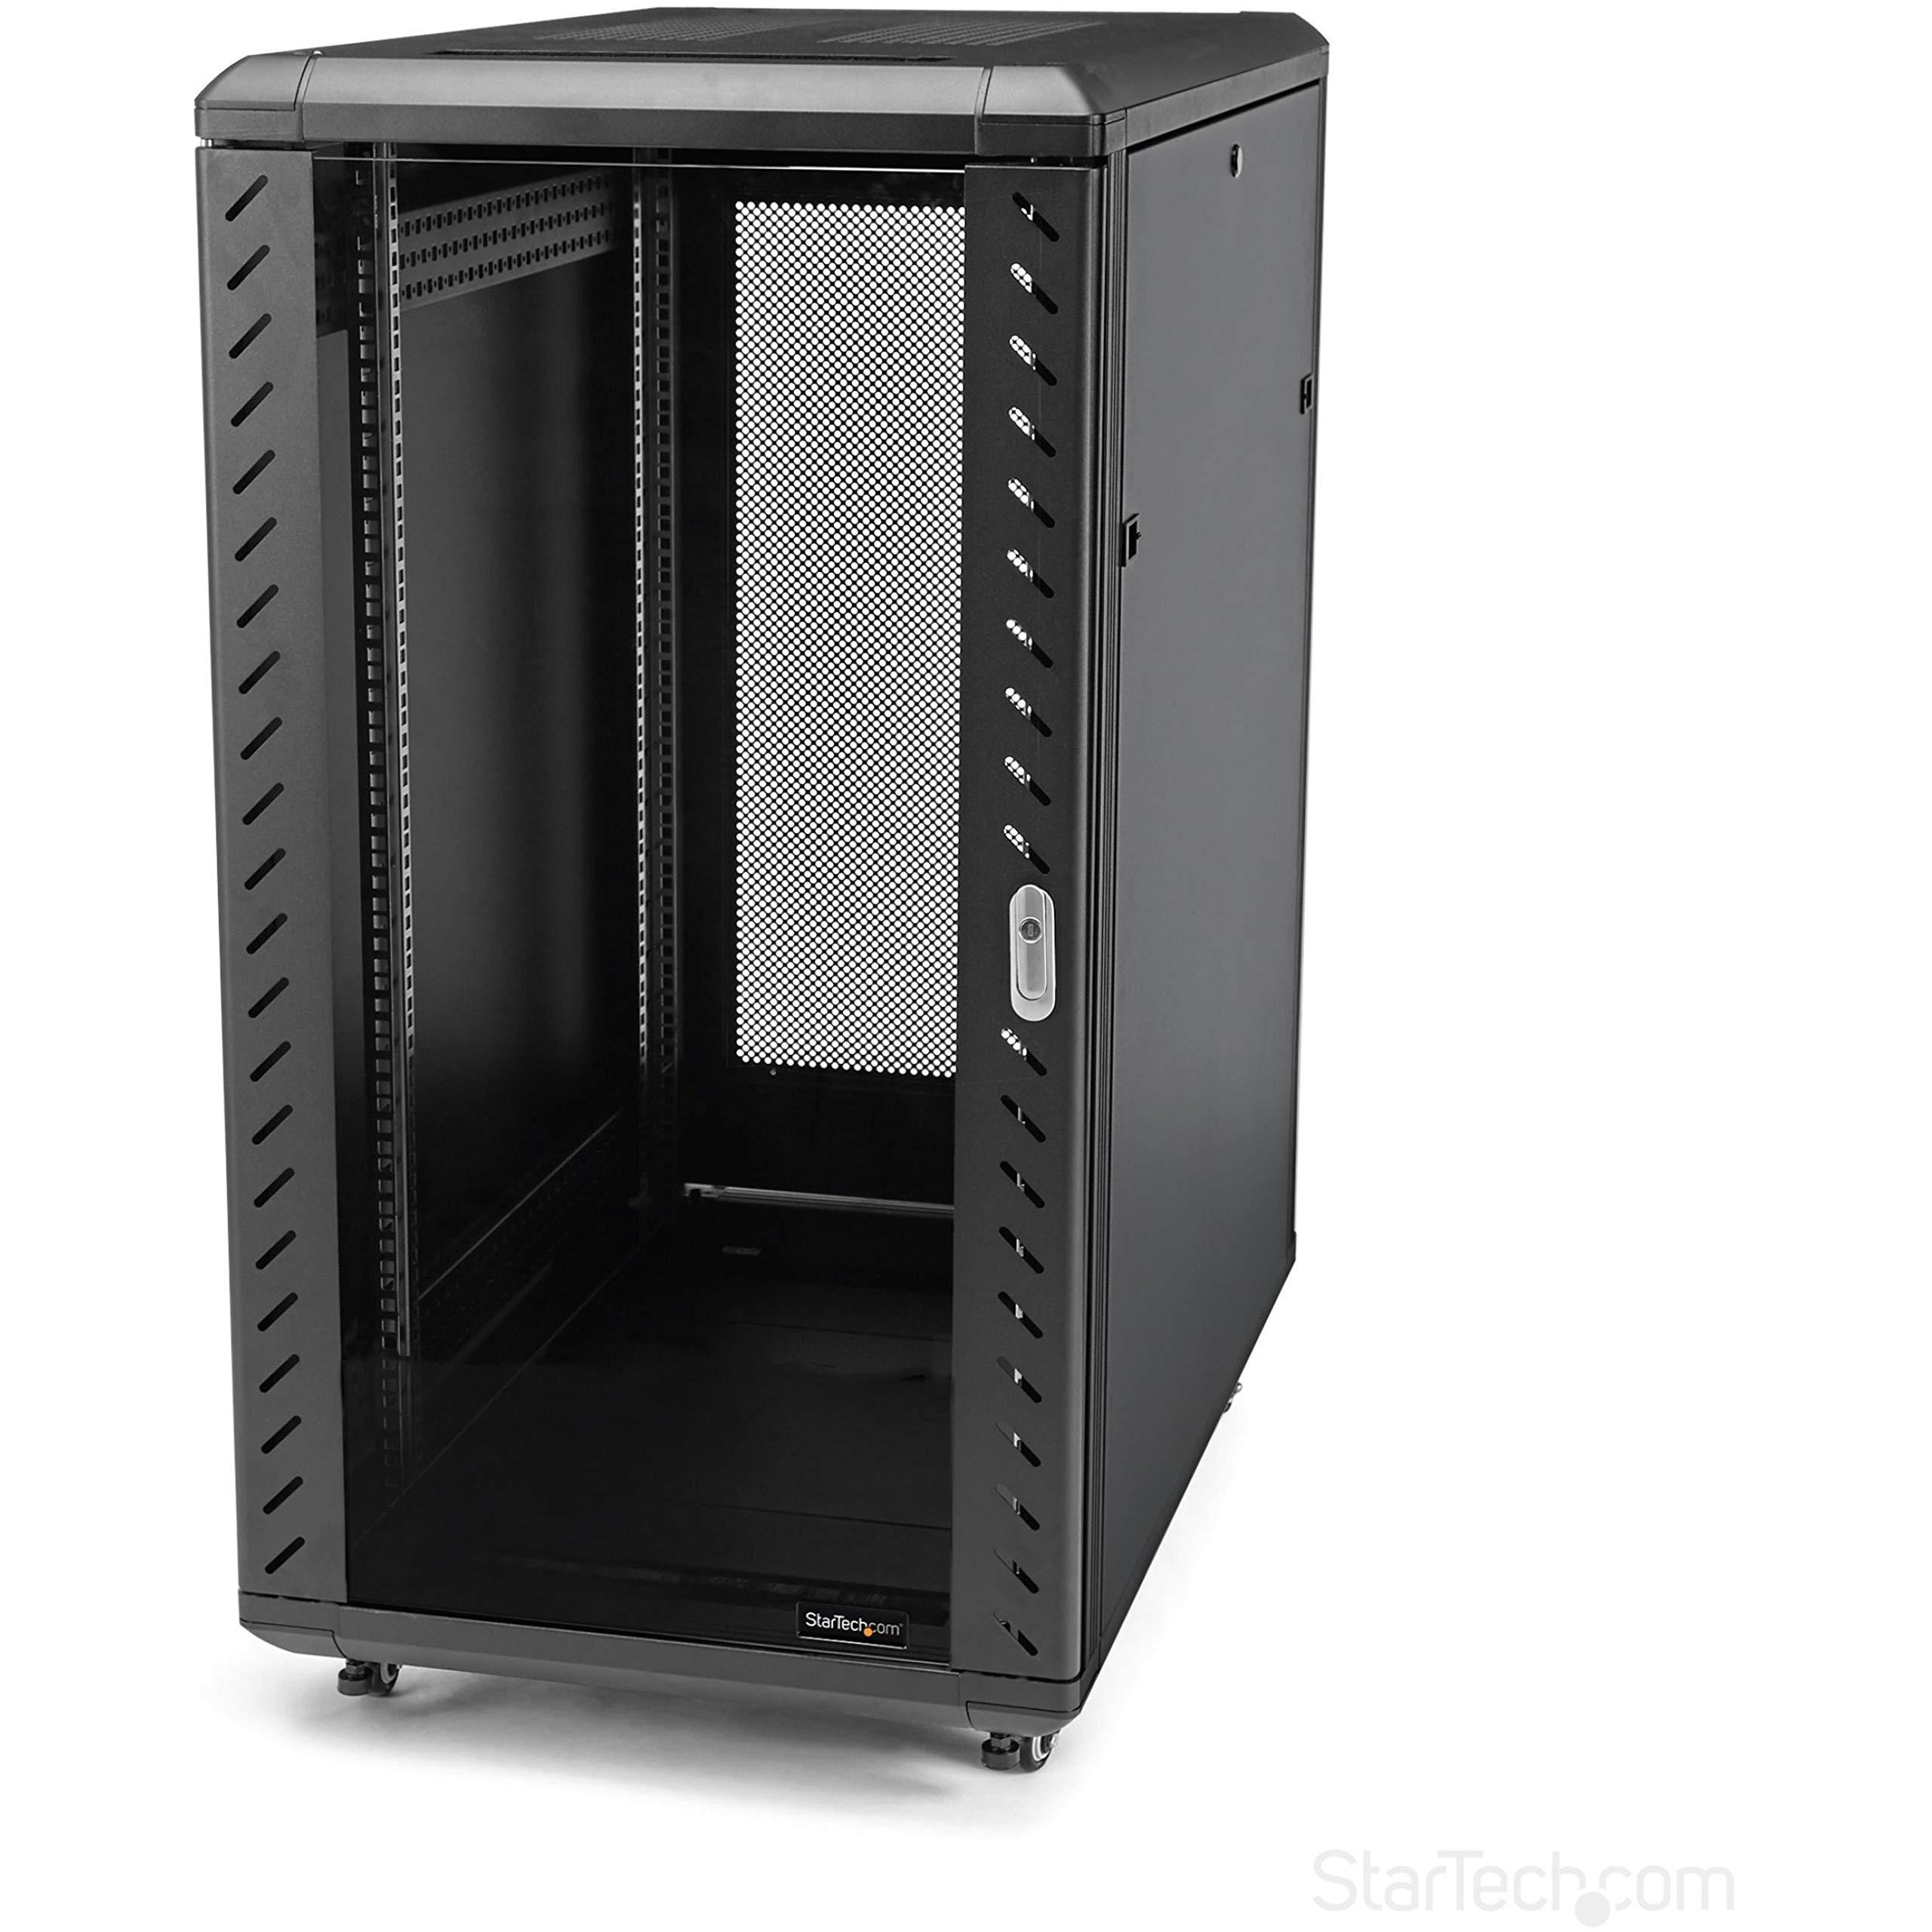 A secure and clean networking equipment rack